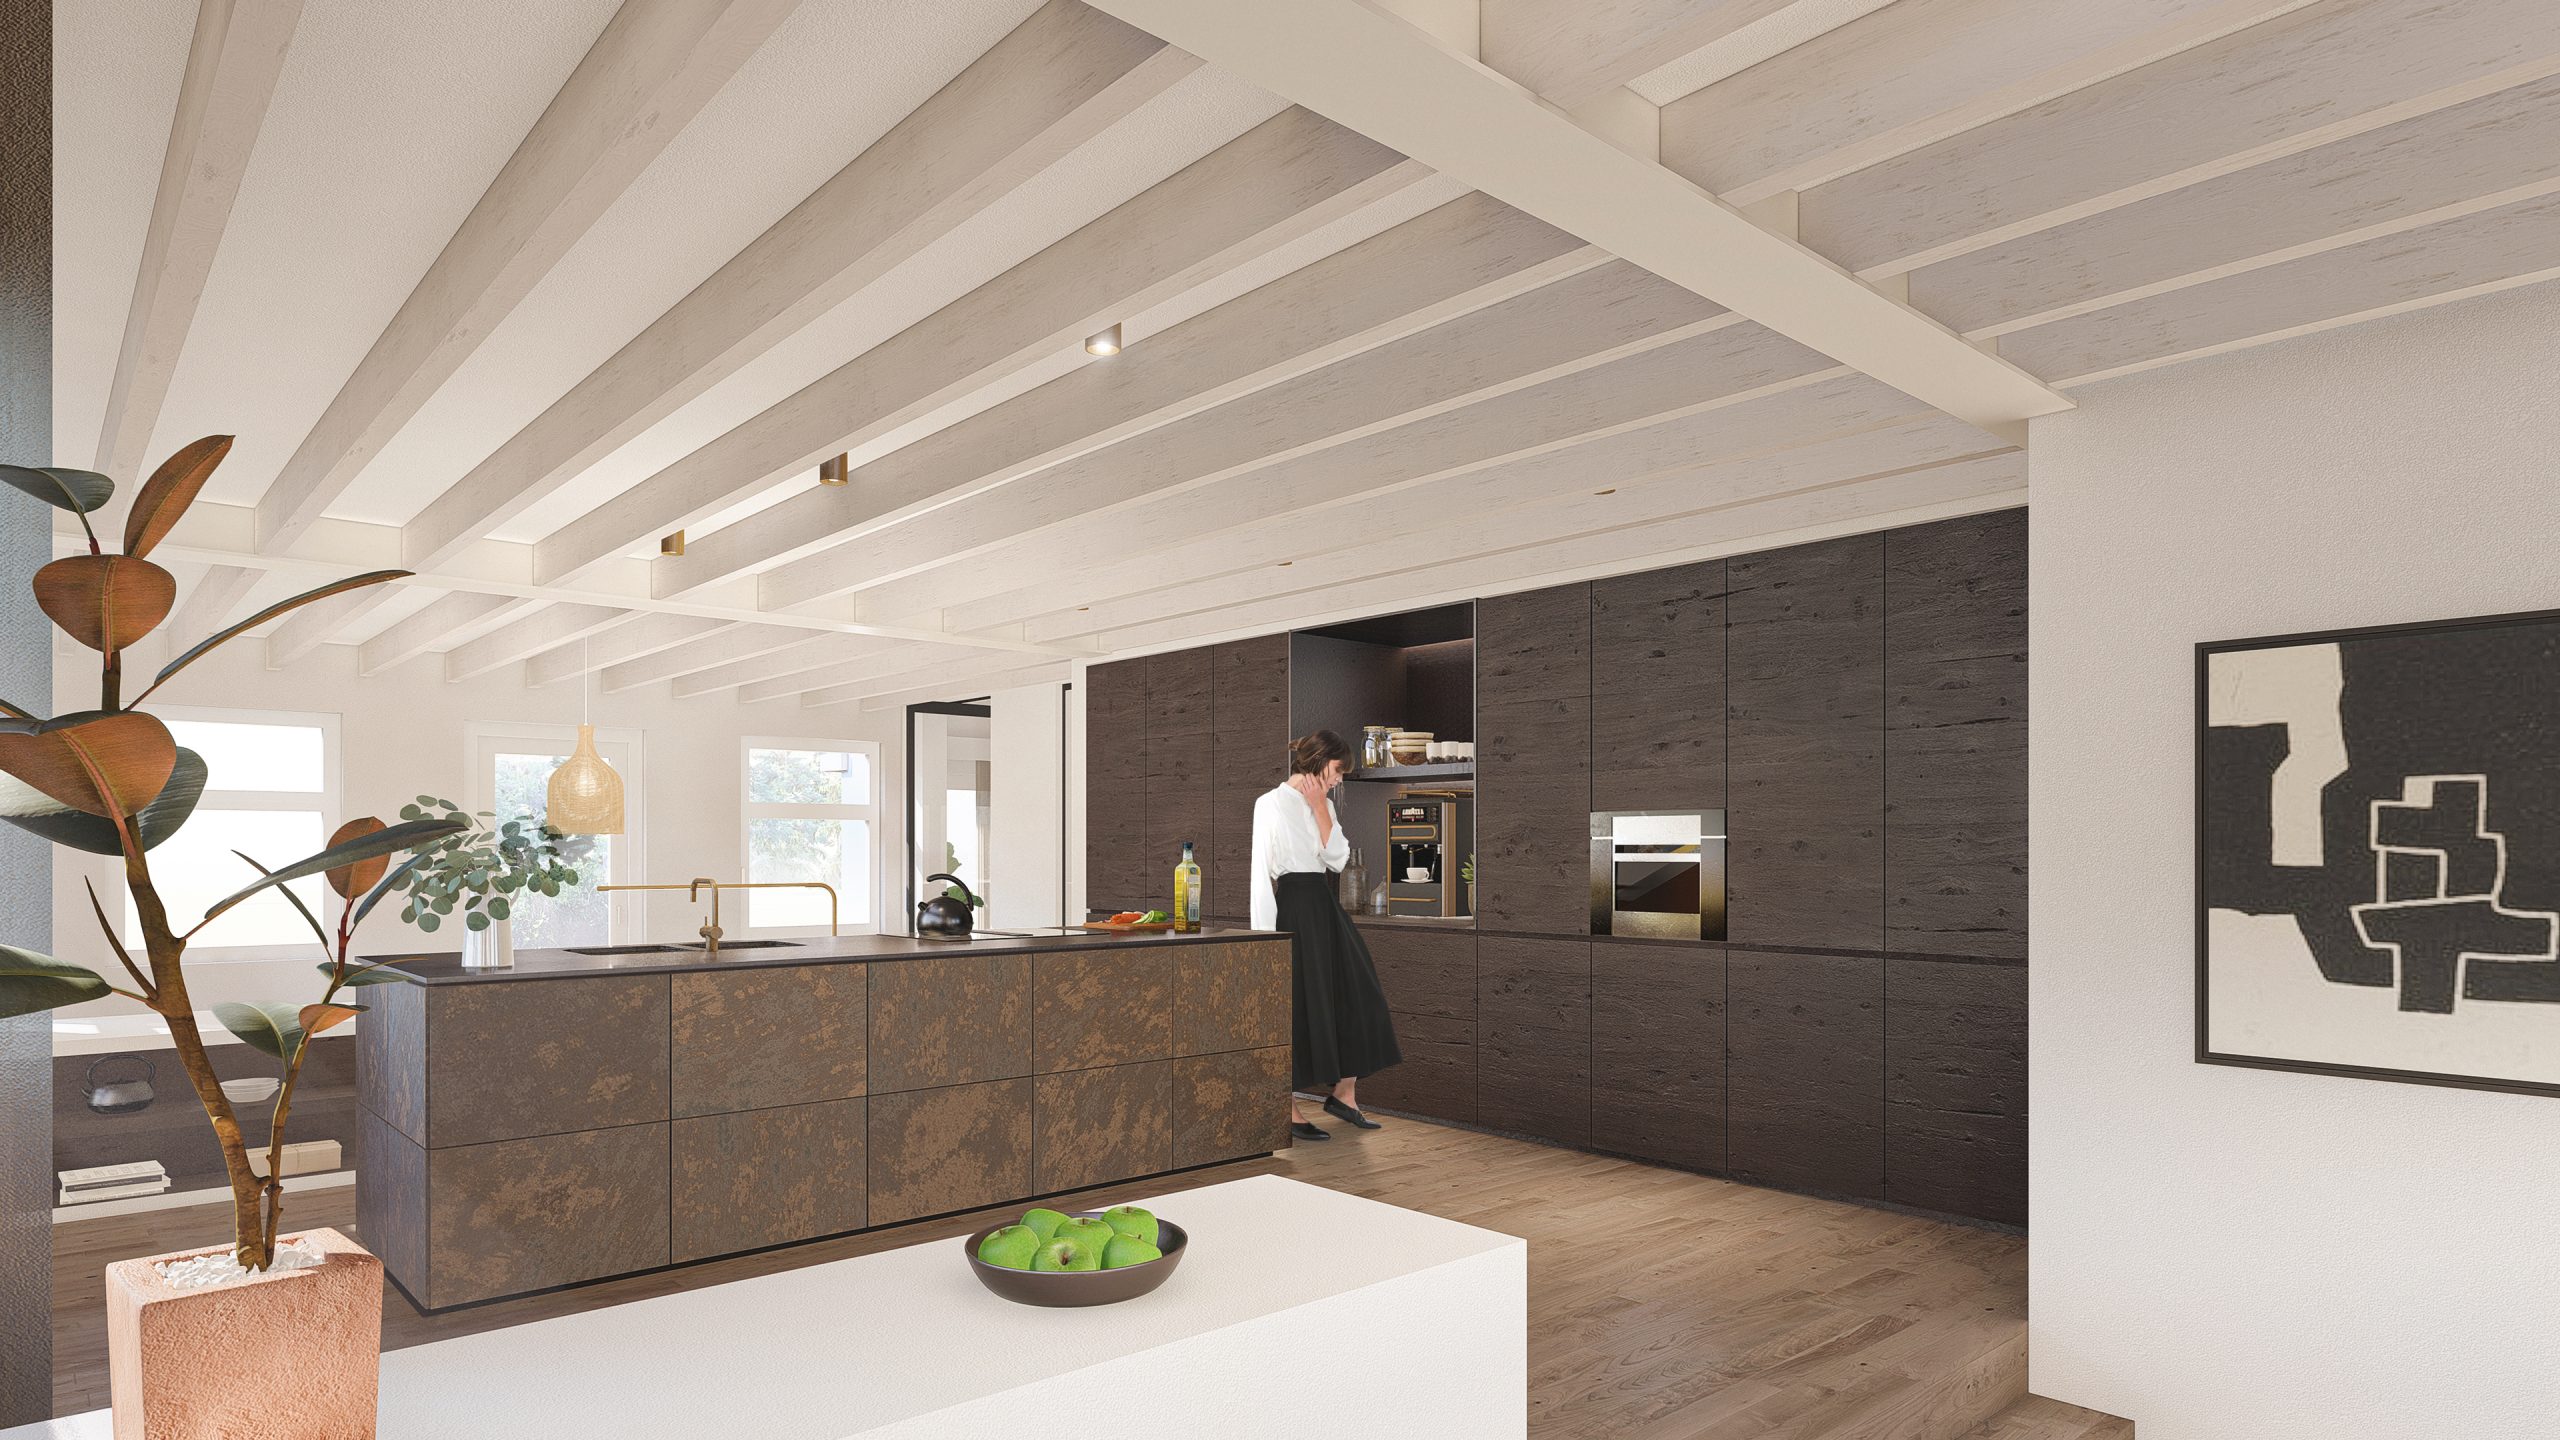 Design bespoke kitchen with signature art piece and textured brass fronts on kitchen isle with dark wooden cabinets by MOST Architecture Rotterdam